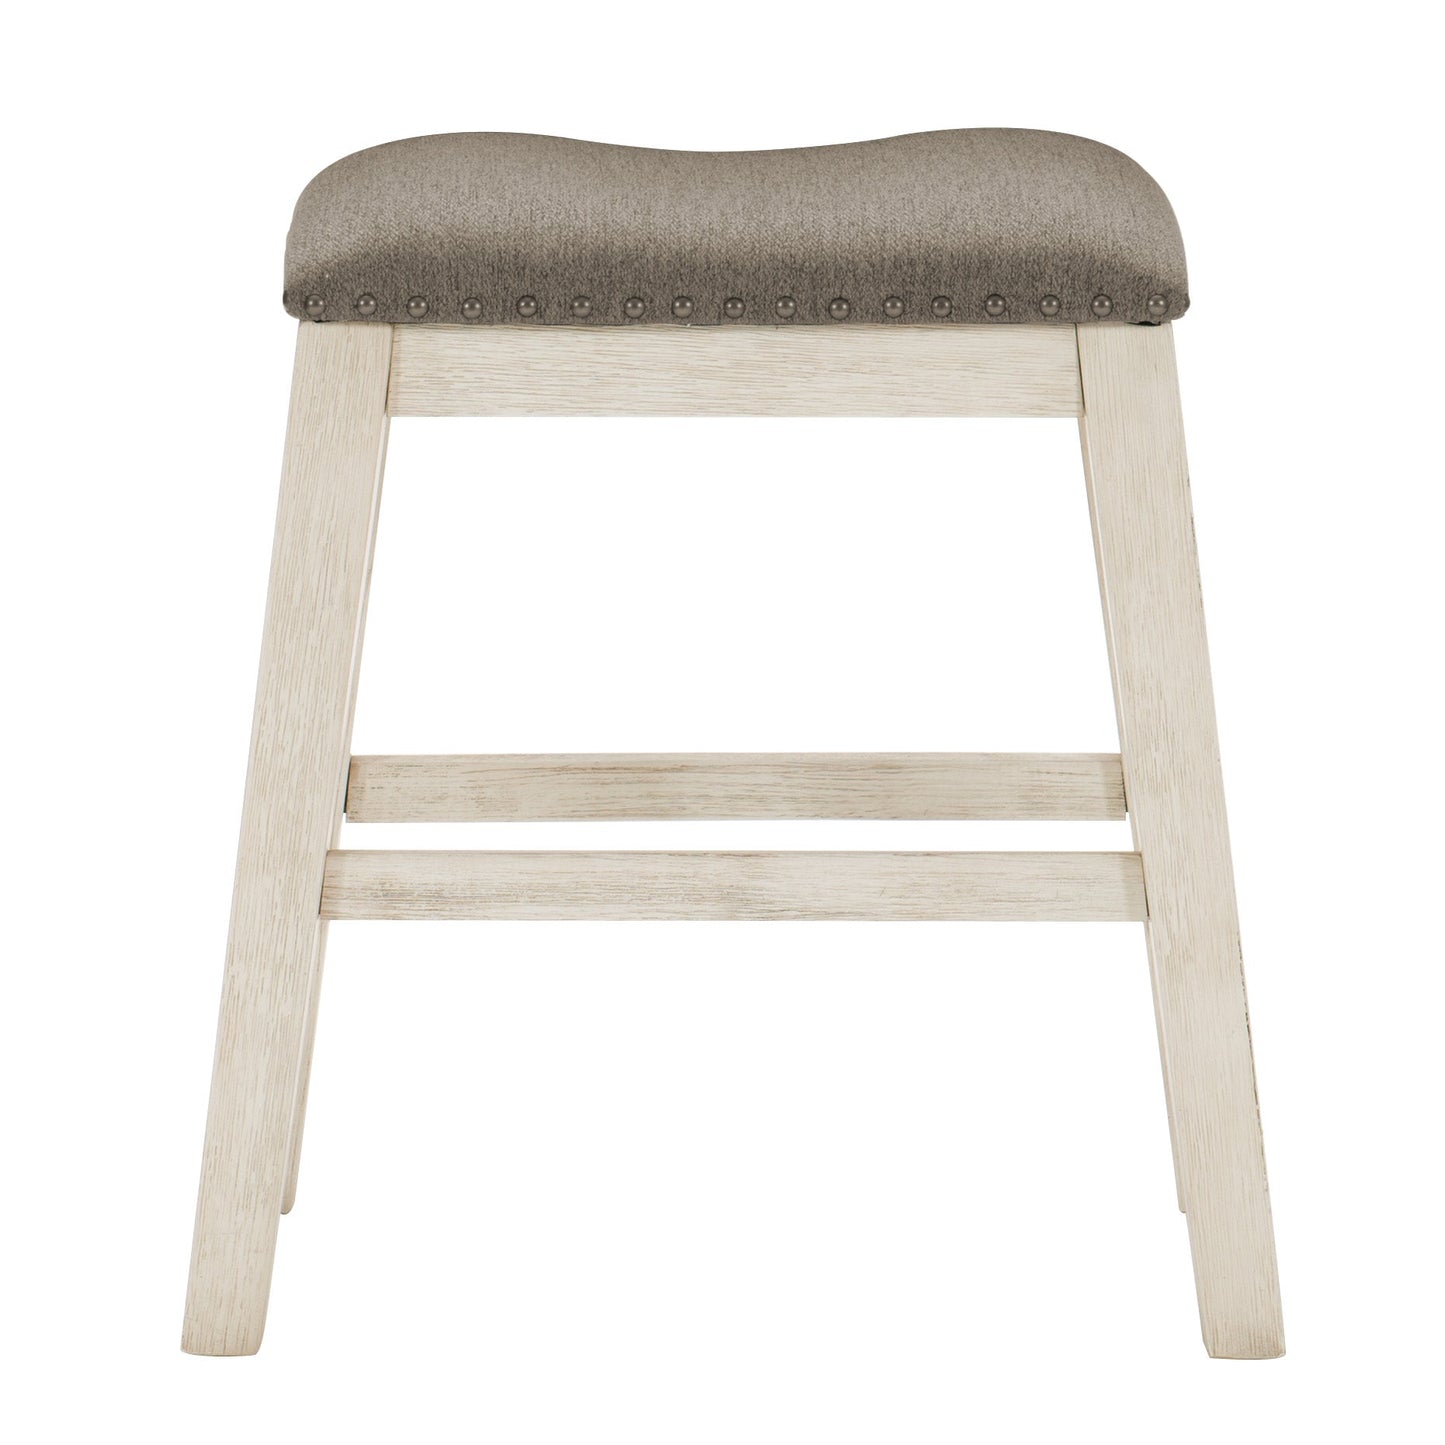 Maverly Counter-Height Stool - Antique White/Brown